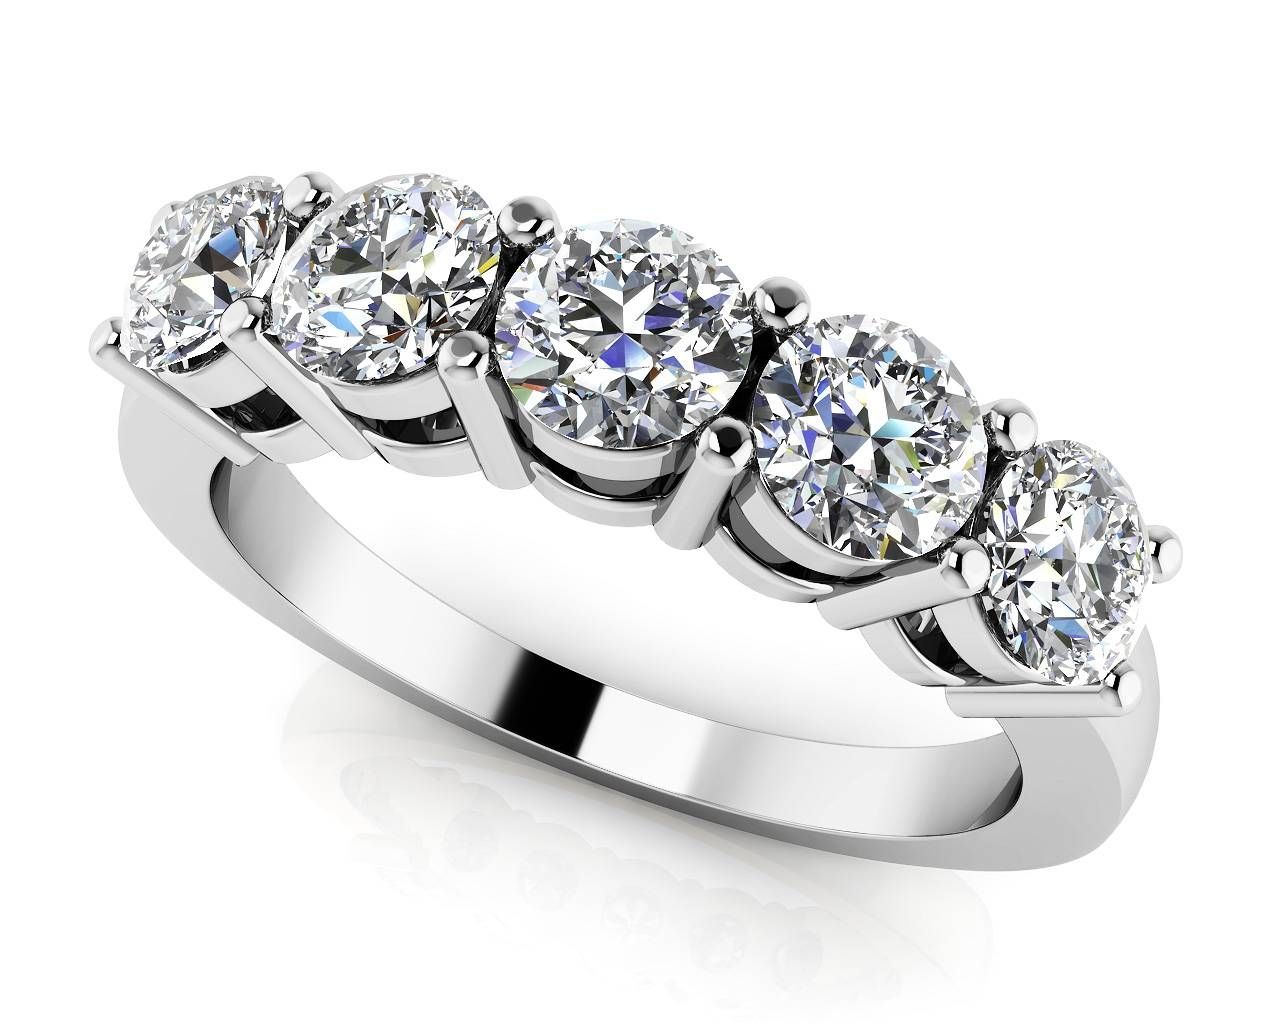 Design Your Own Diamond Anniversary Ring & Eternity Ring Pertaining To Most Current 25th Anniversary Rings (View 9 of 25)